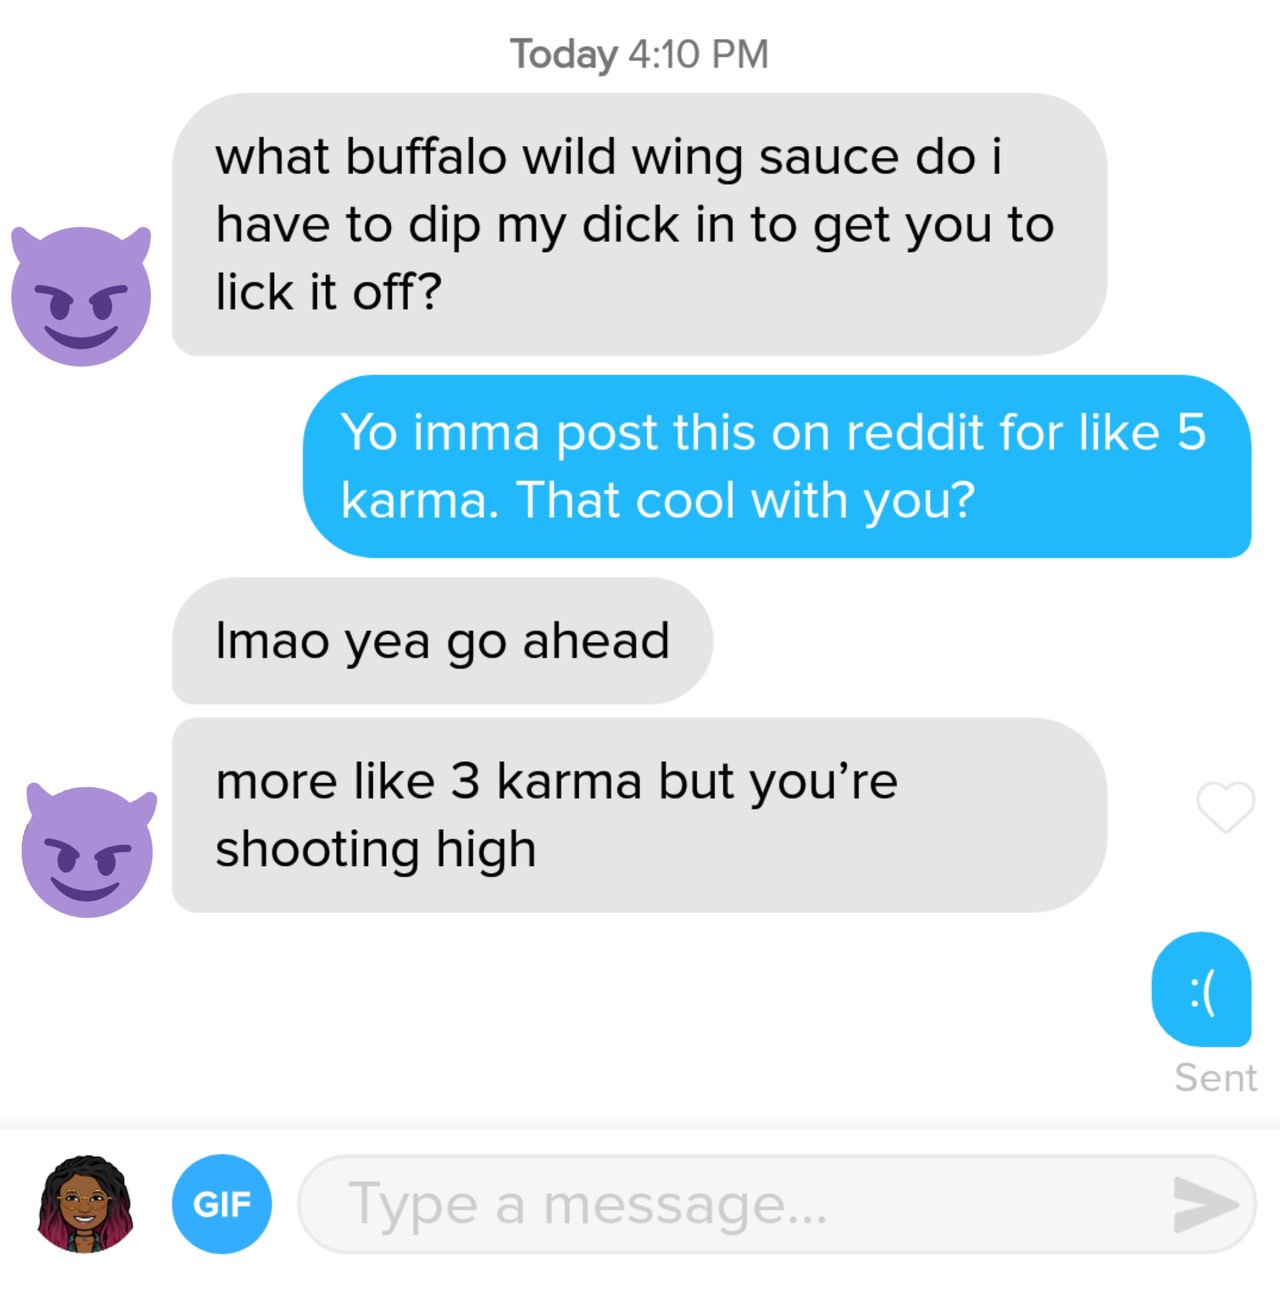 tinder - online advertising - Today what buffalo wild wing sauce do i have to dip my dick in to get you to lick it off? Yo imma post this on reddit for 5 karma. That cool with you? Imao yea go ahead more 3 karma but you're shooting high Sent Gif Type a me